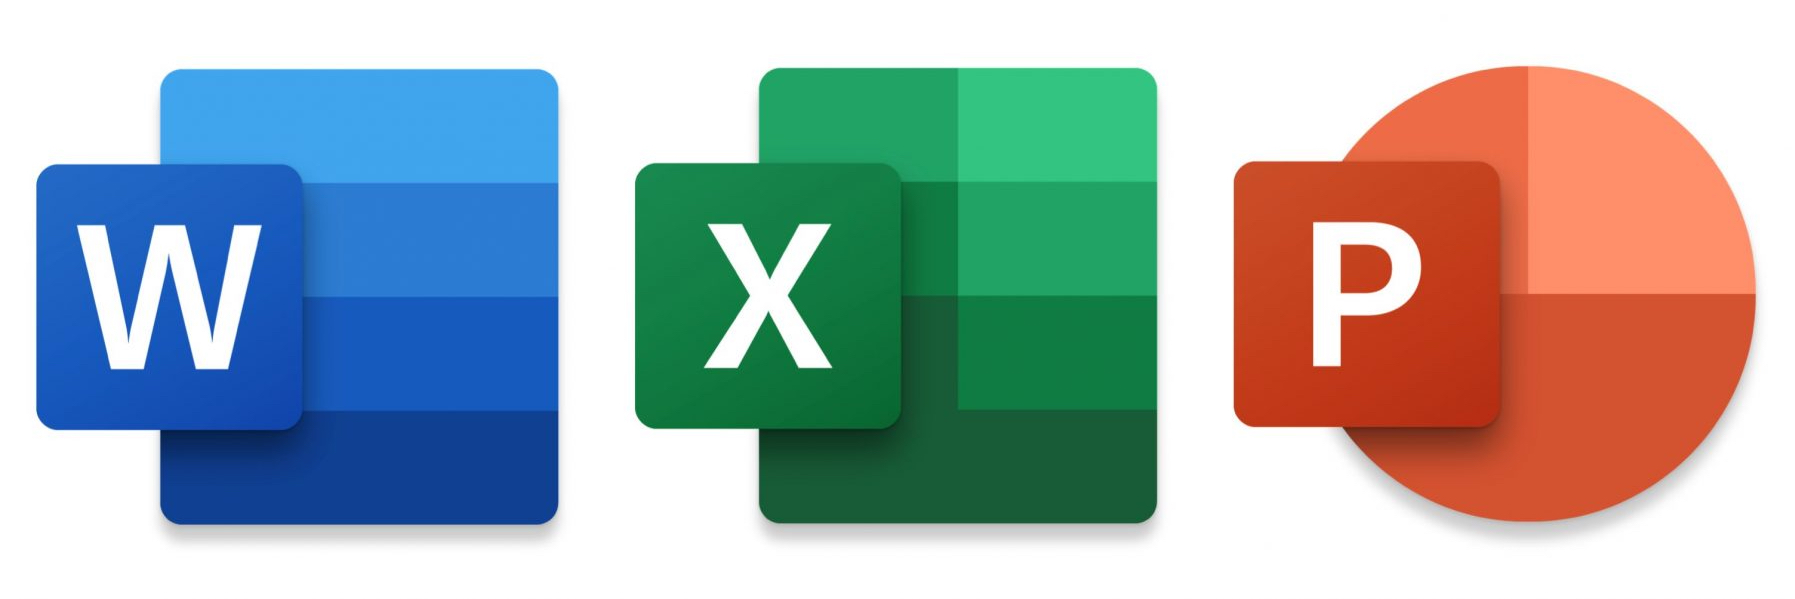 word excel powerpoint download free